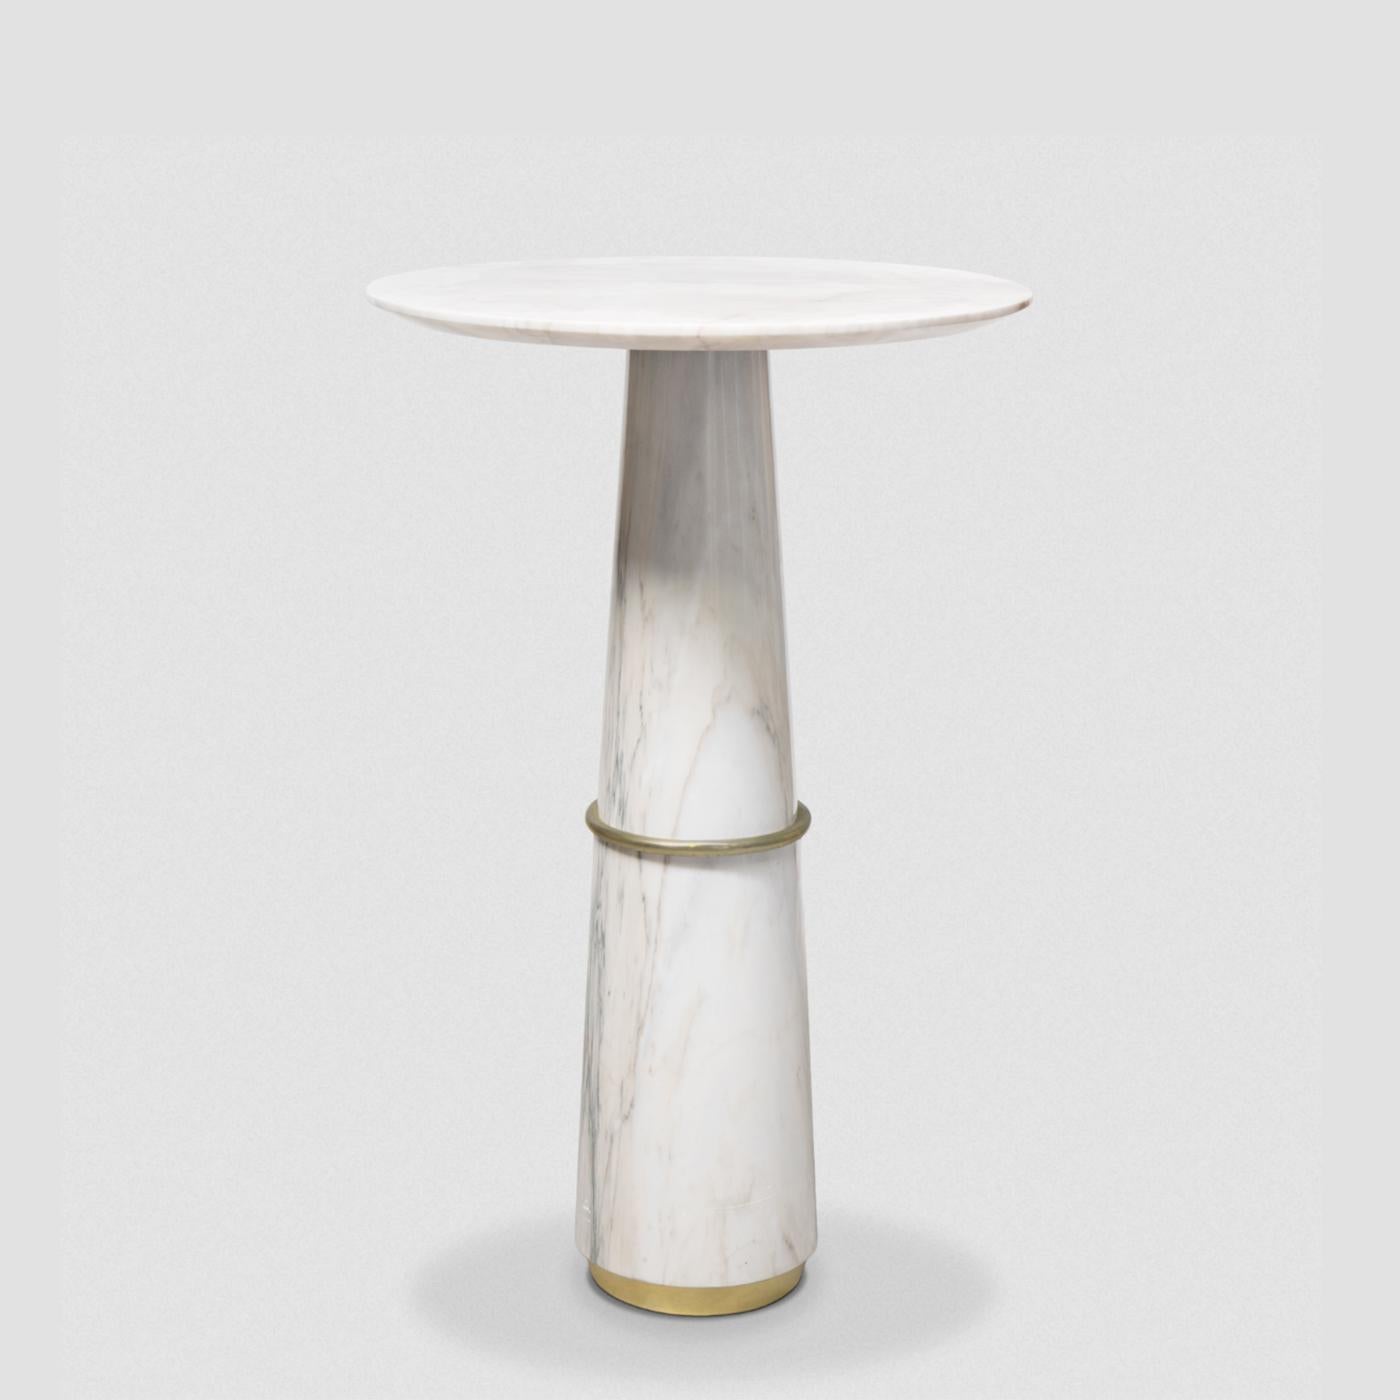 Table Tama High Bar all in solid white marble,
with polished brass finishes.